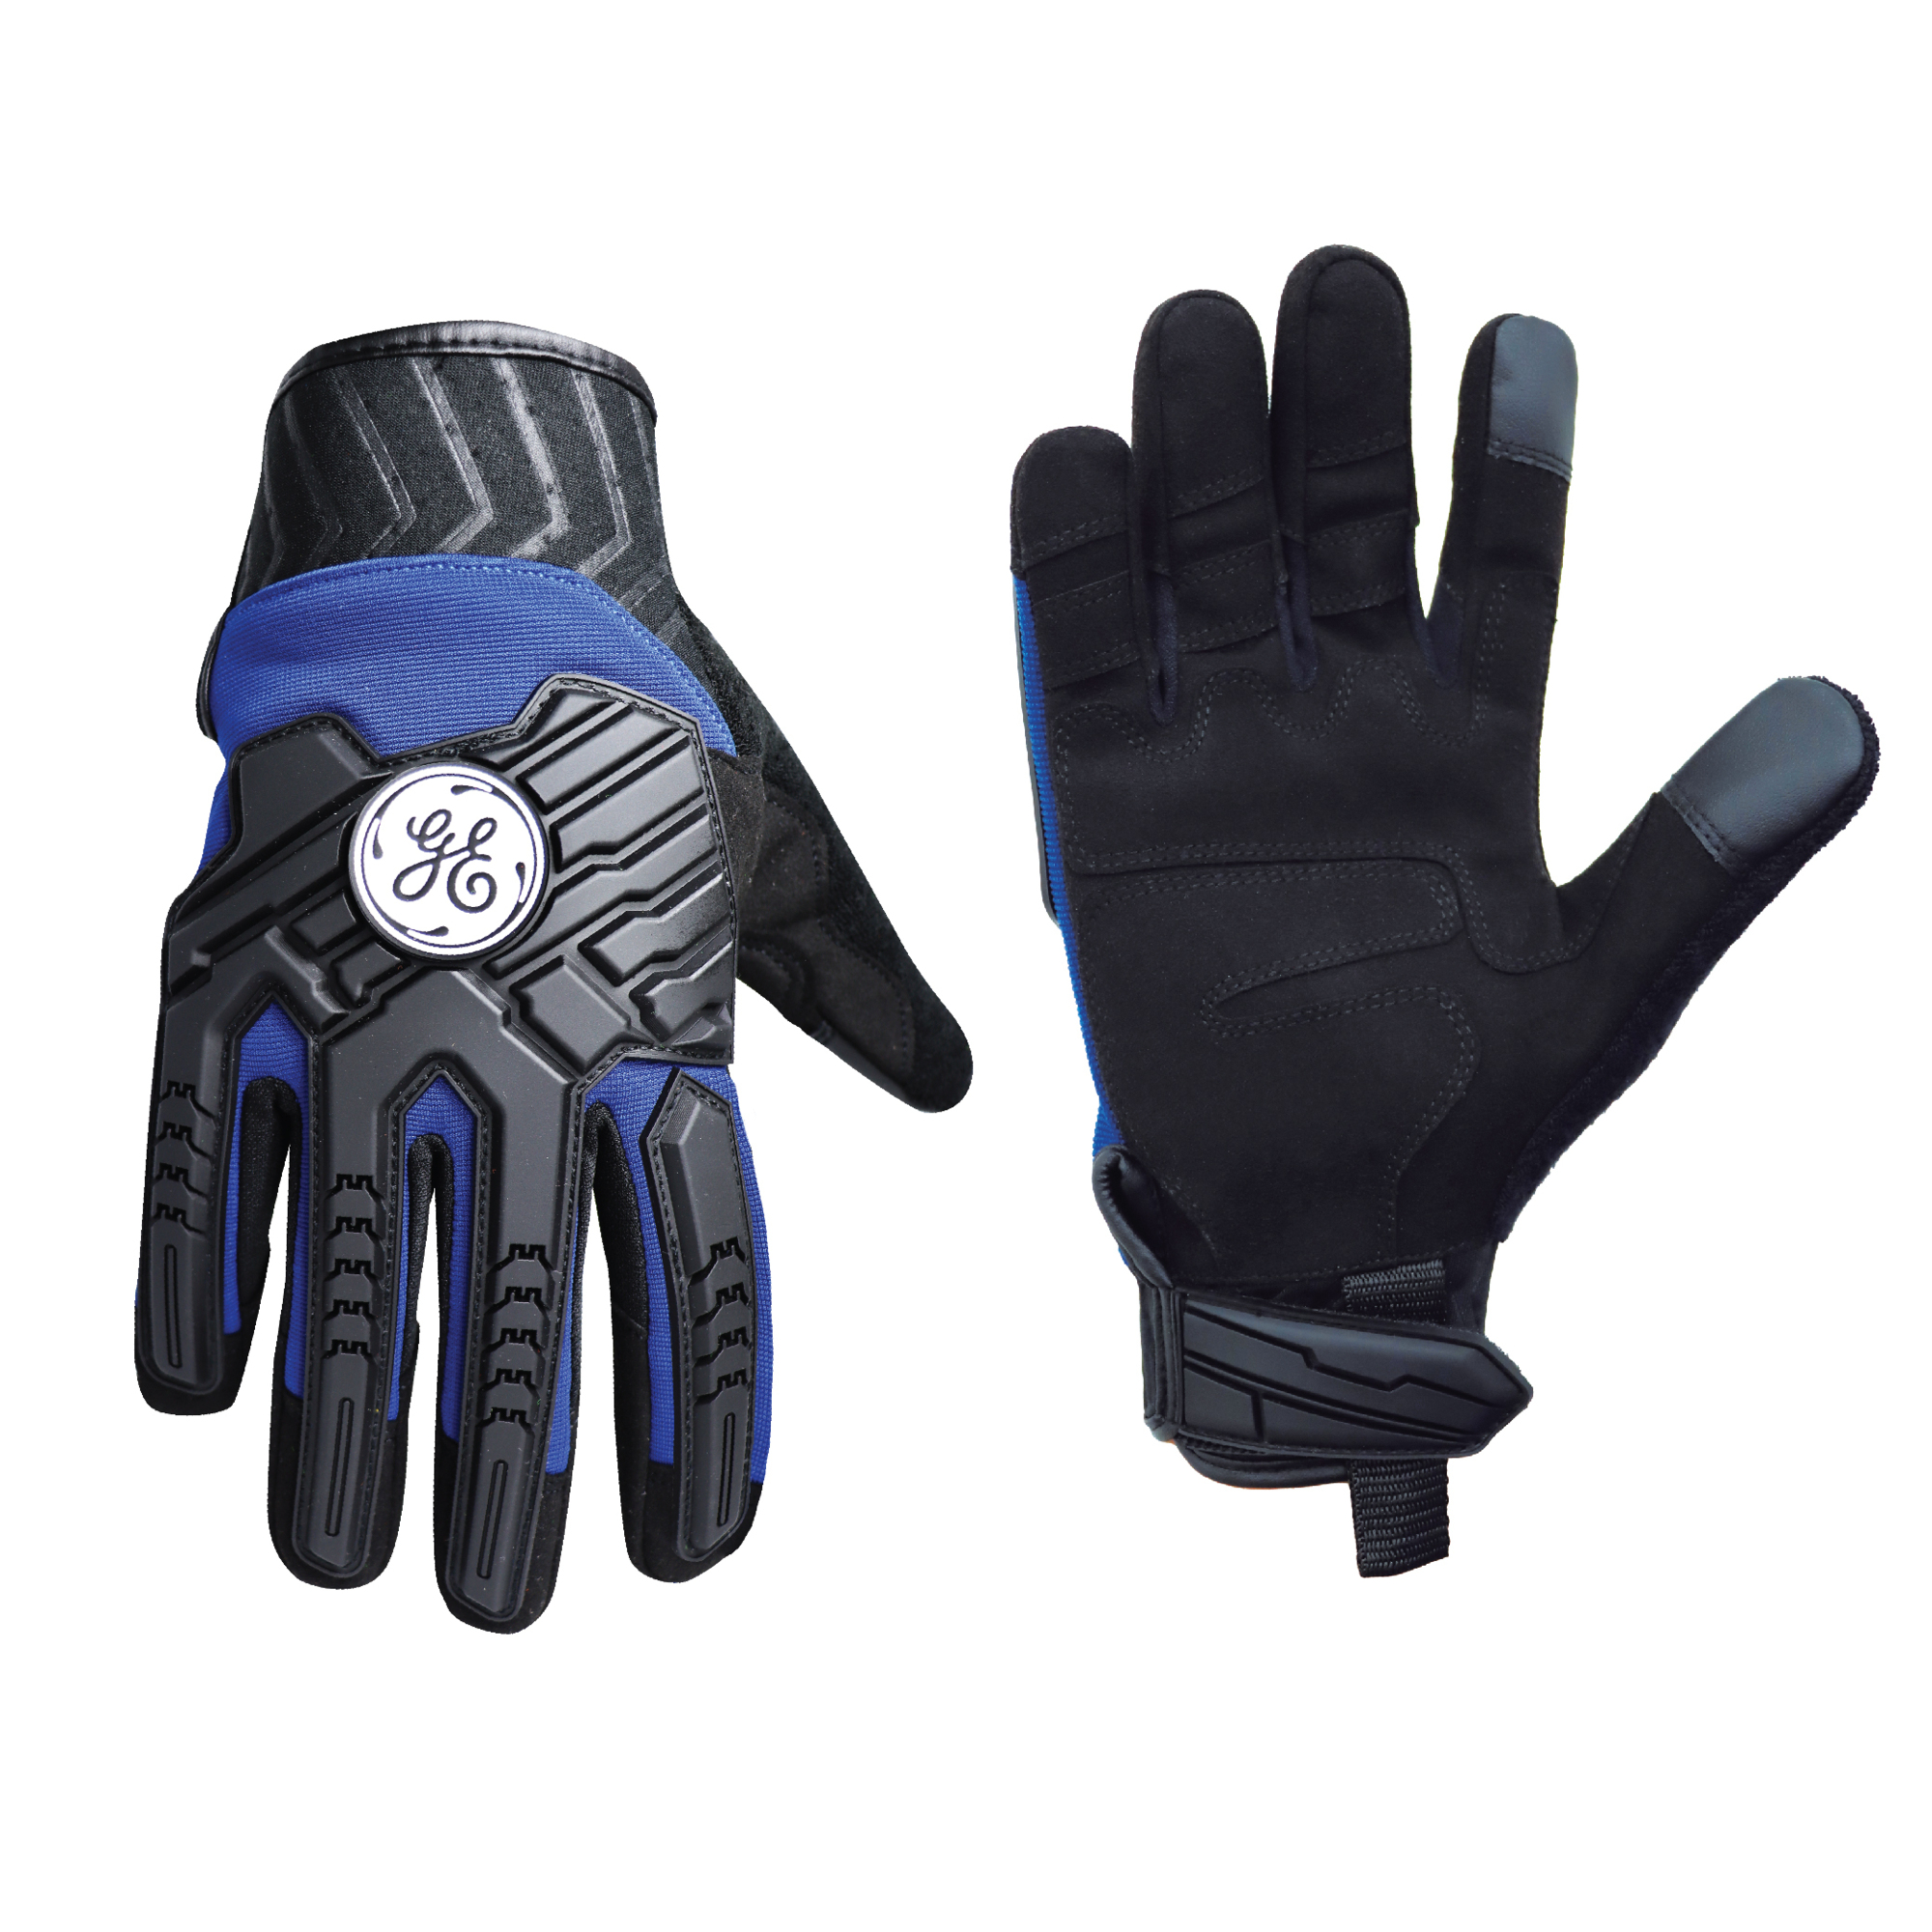 General Electric, Mechanic's Glove Blue M 1 pair, Size M, Included (qty.) 1, Model GG416MC